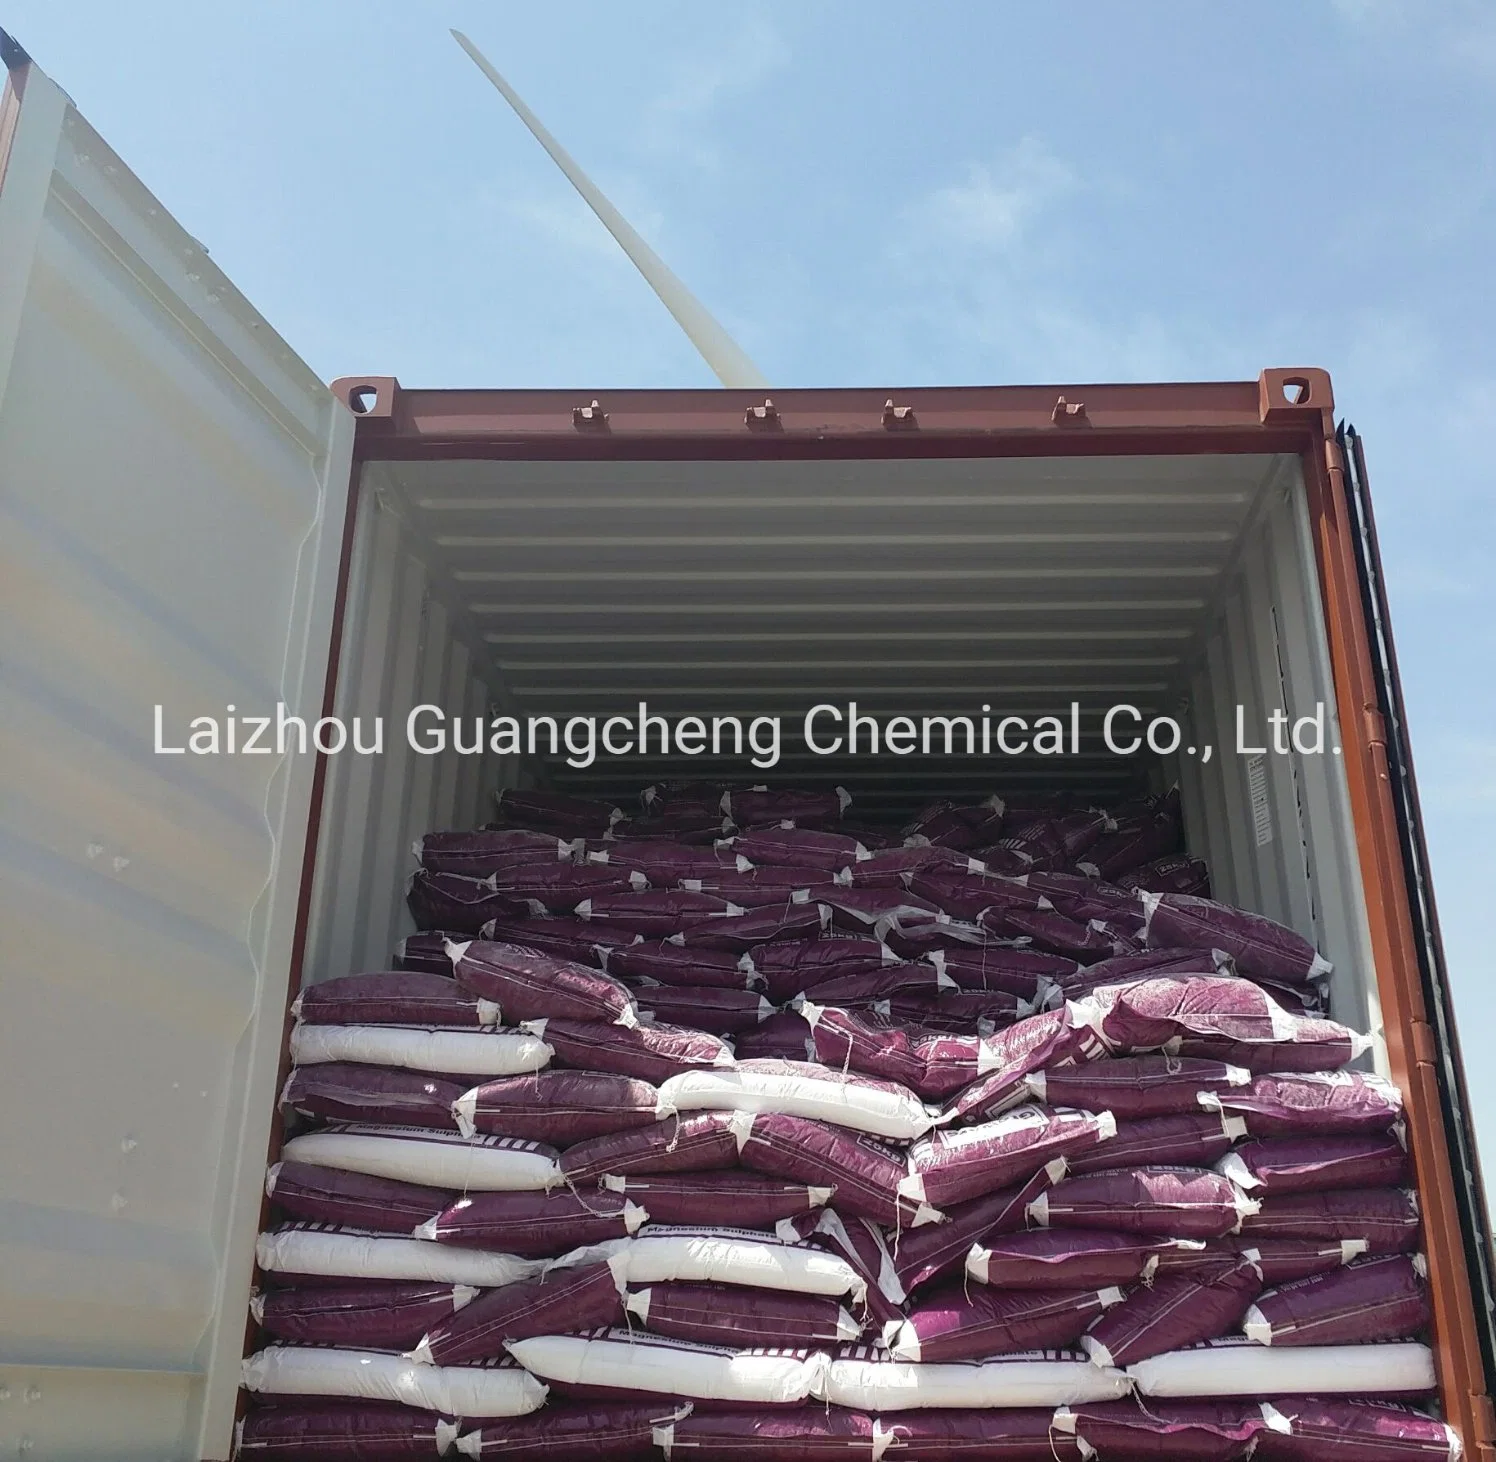 Industrial Additive Magnesium Sulphate Heptahydrate